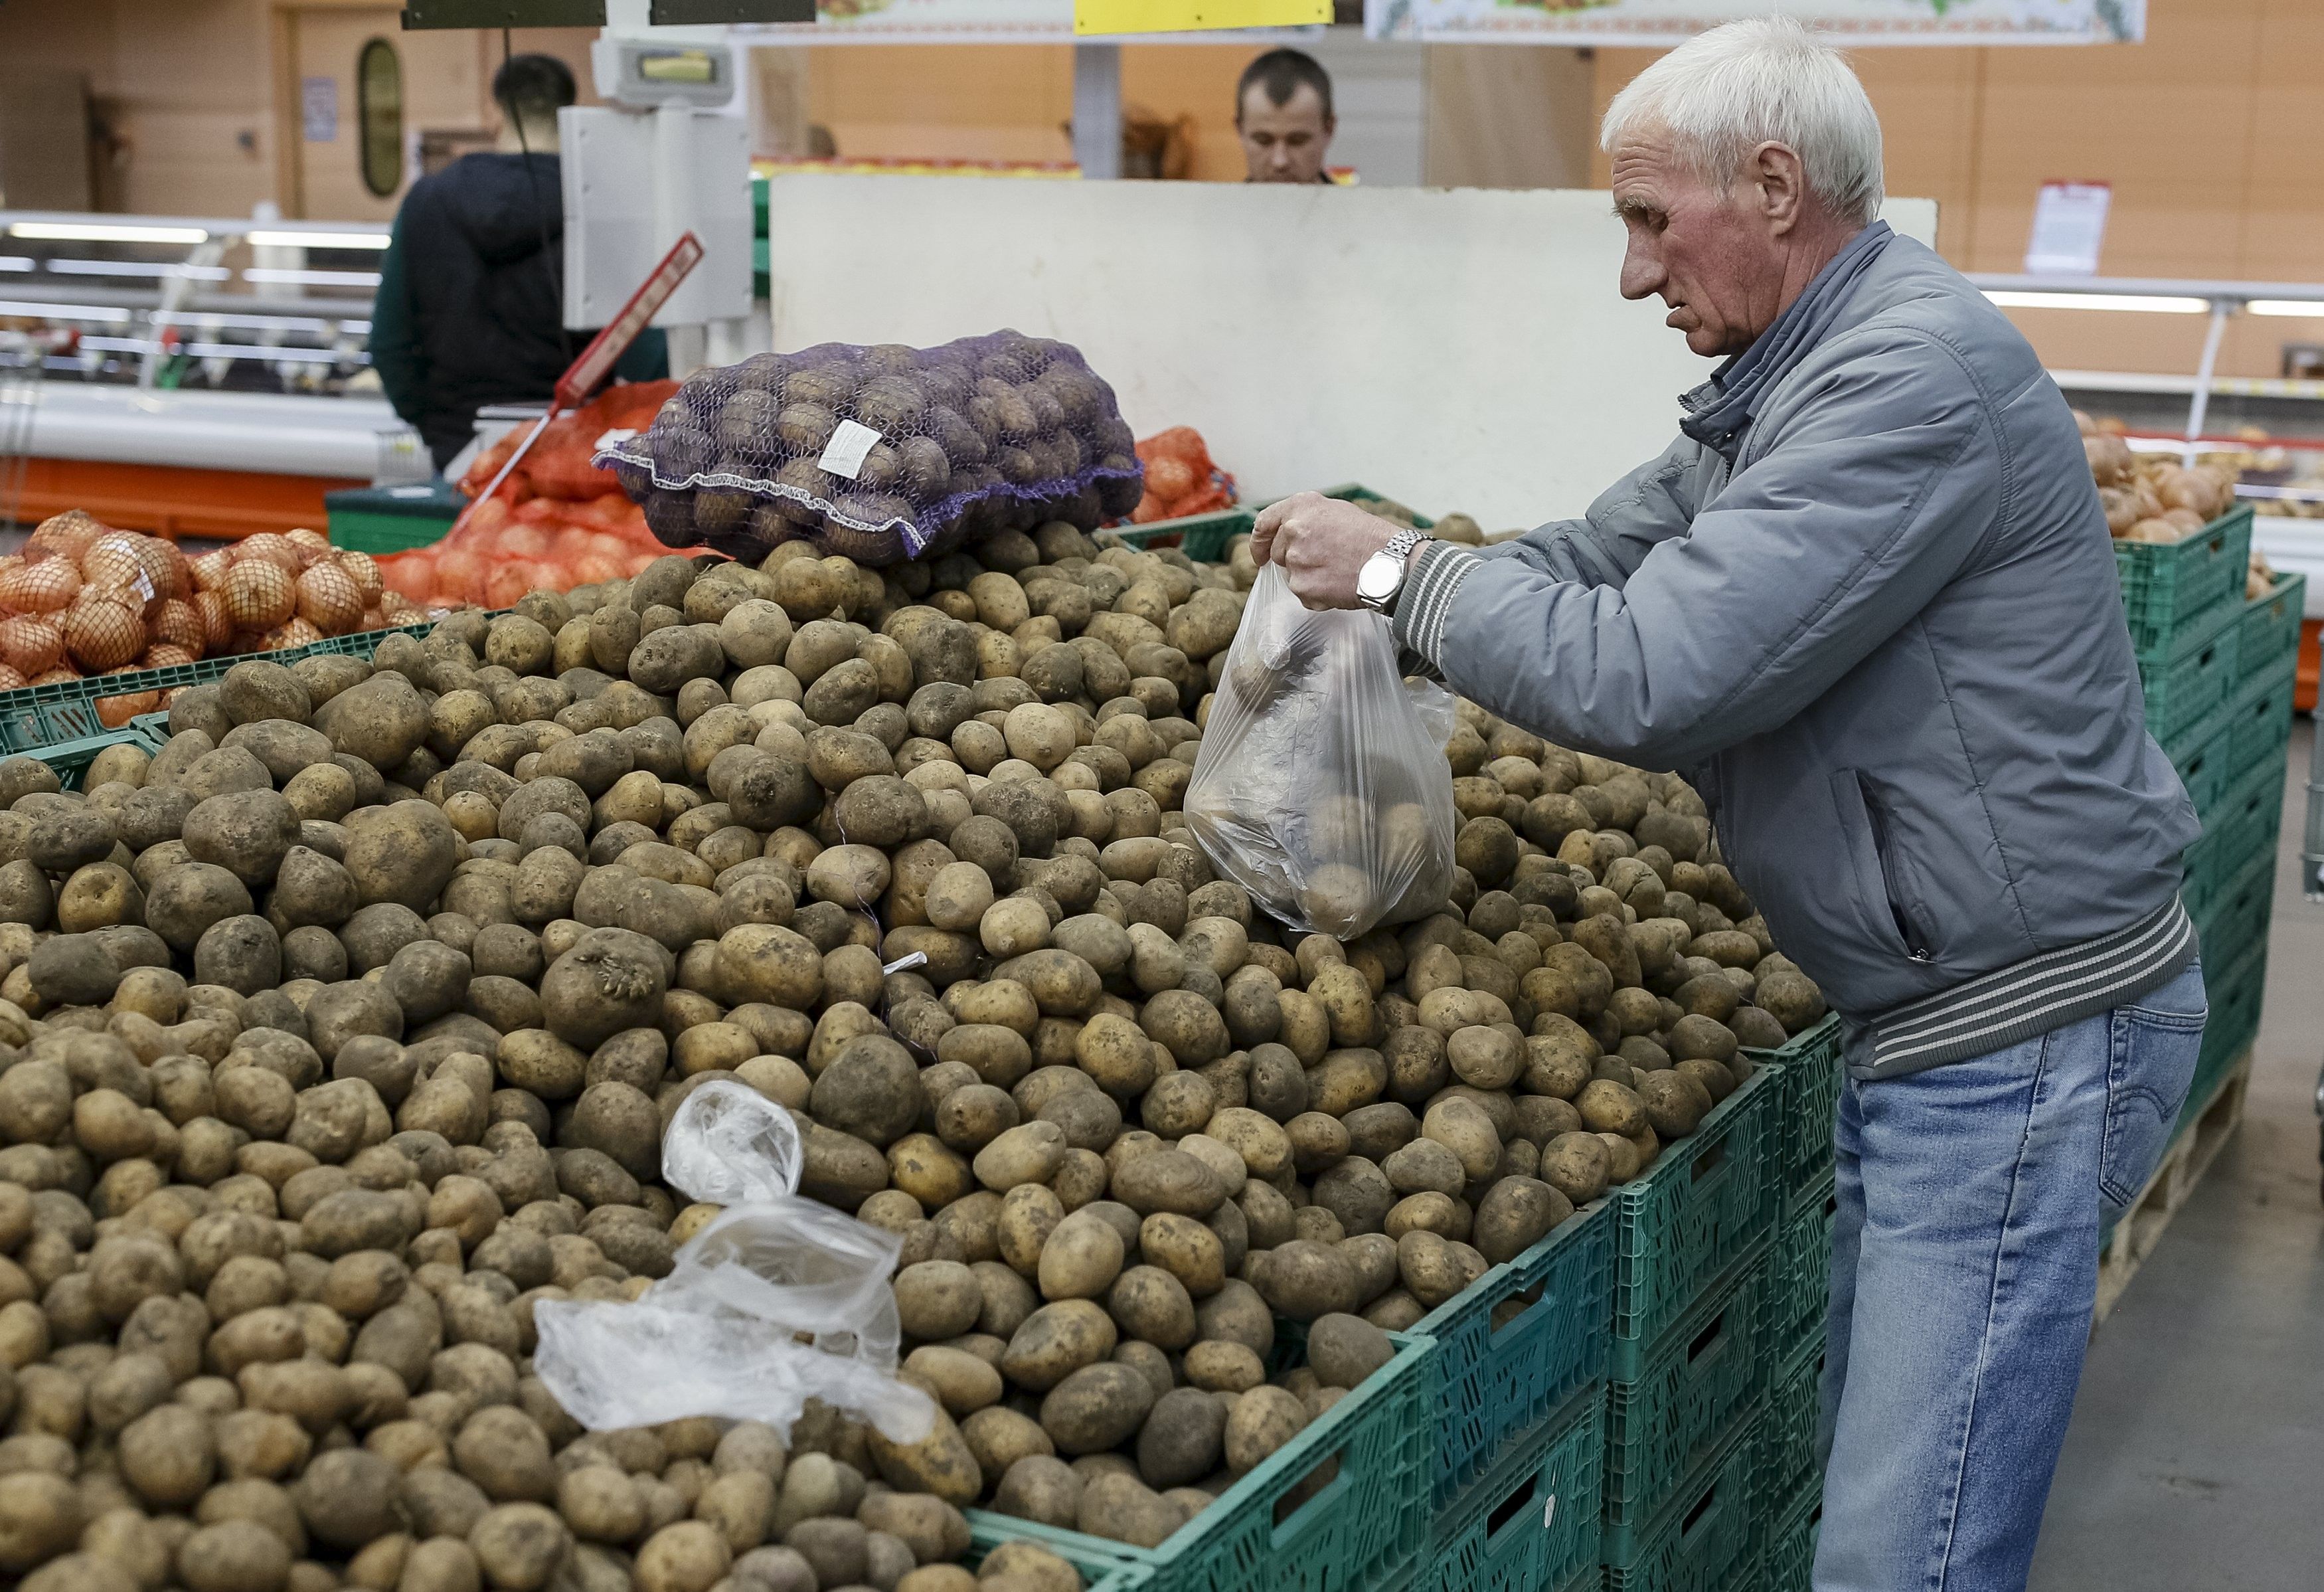 Potato imports to Ukraine up by 43 times in 2019 - UNIAN